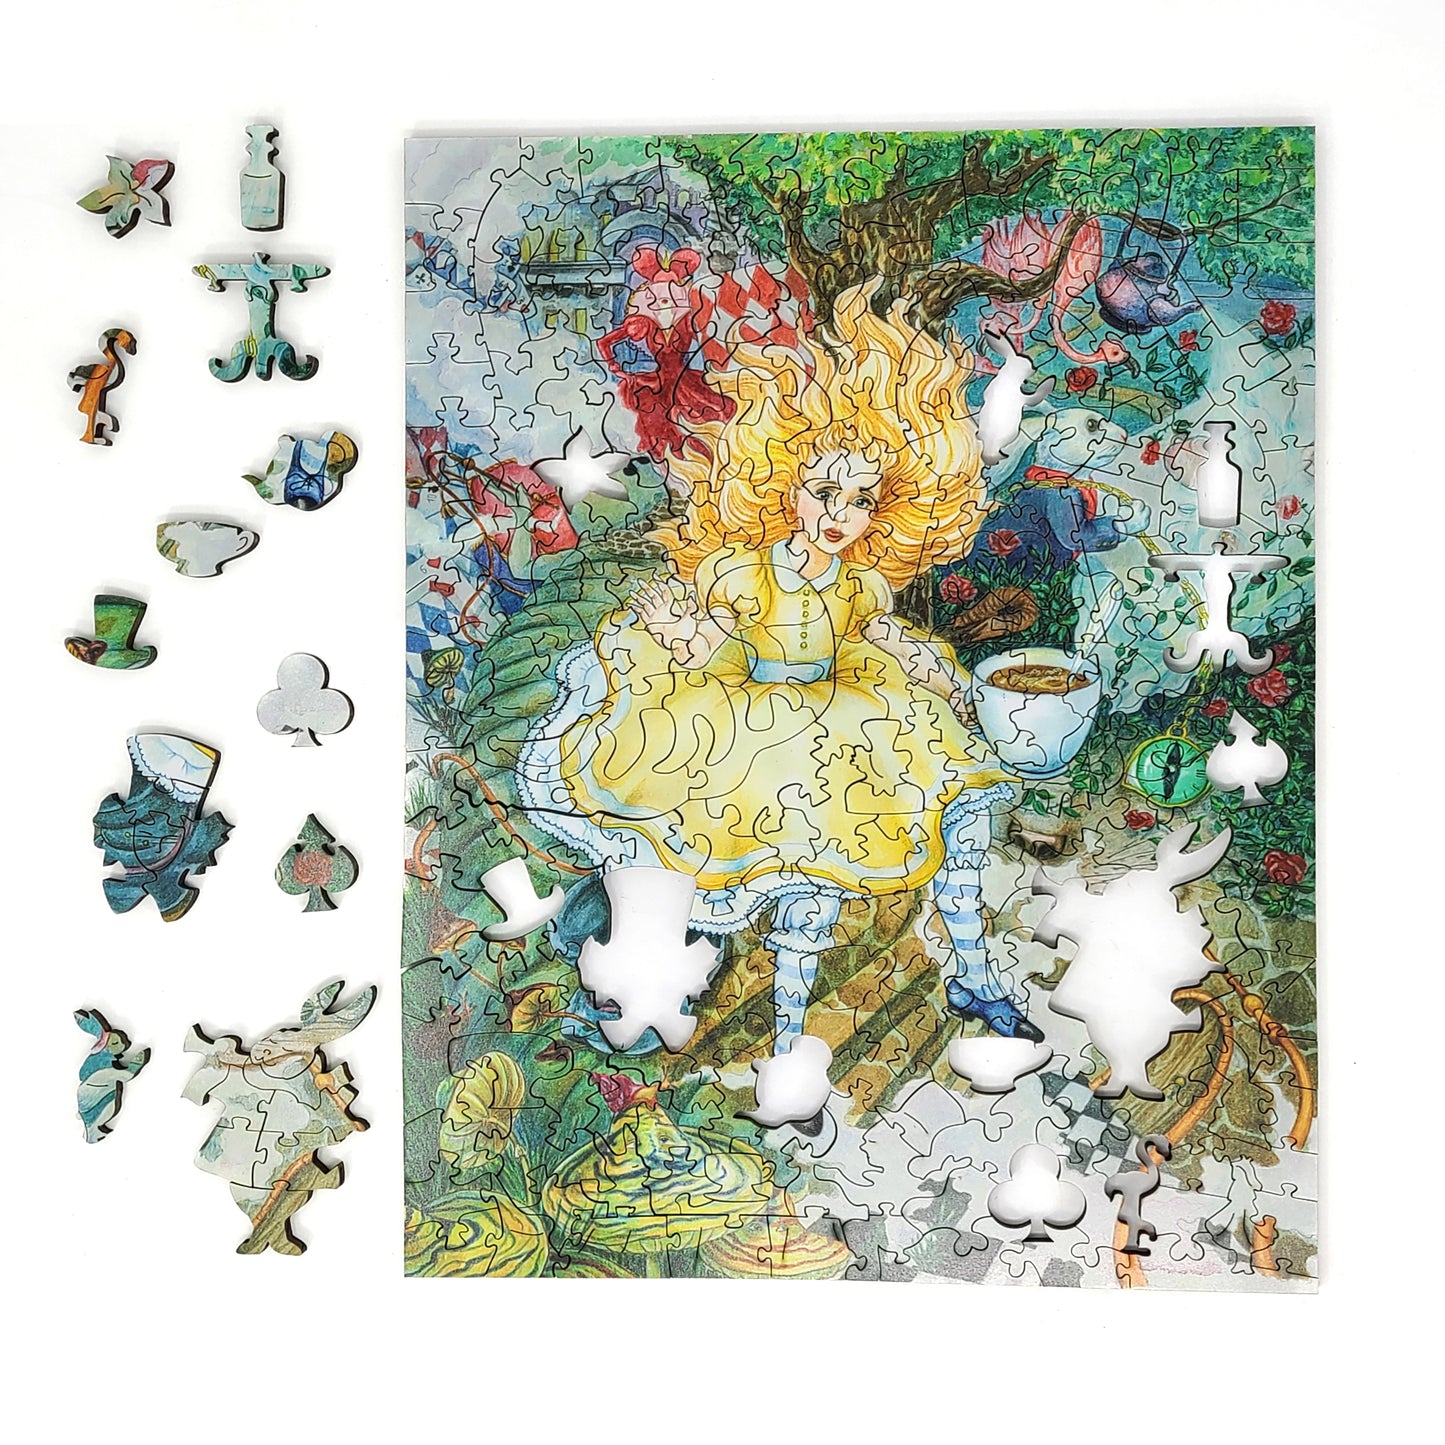 Large Format Wooden Jigsaw Puzzle with Uniquely Shaped Pieces for Seniors and Adults - 200 Pieces - Alice's Fantasies